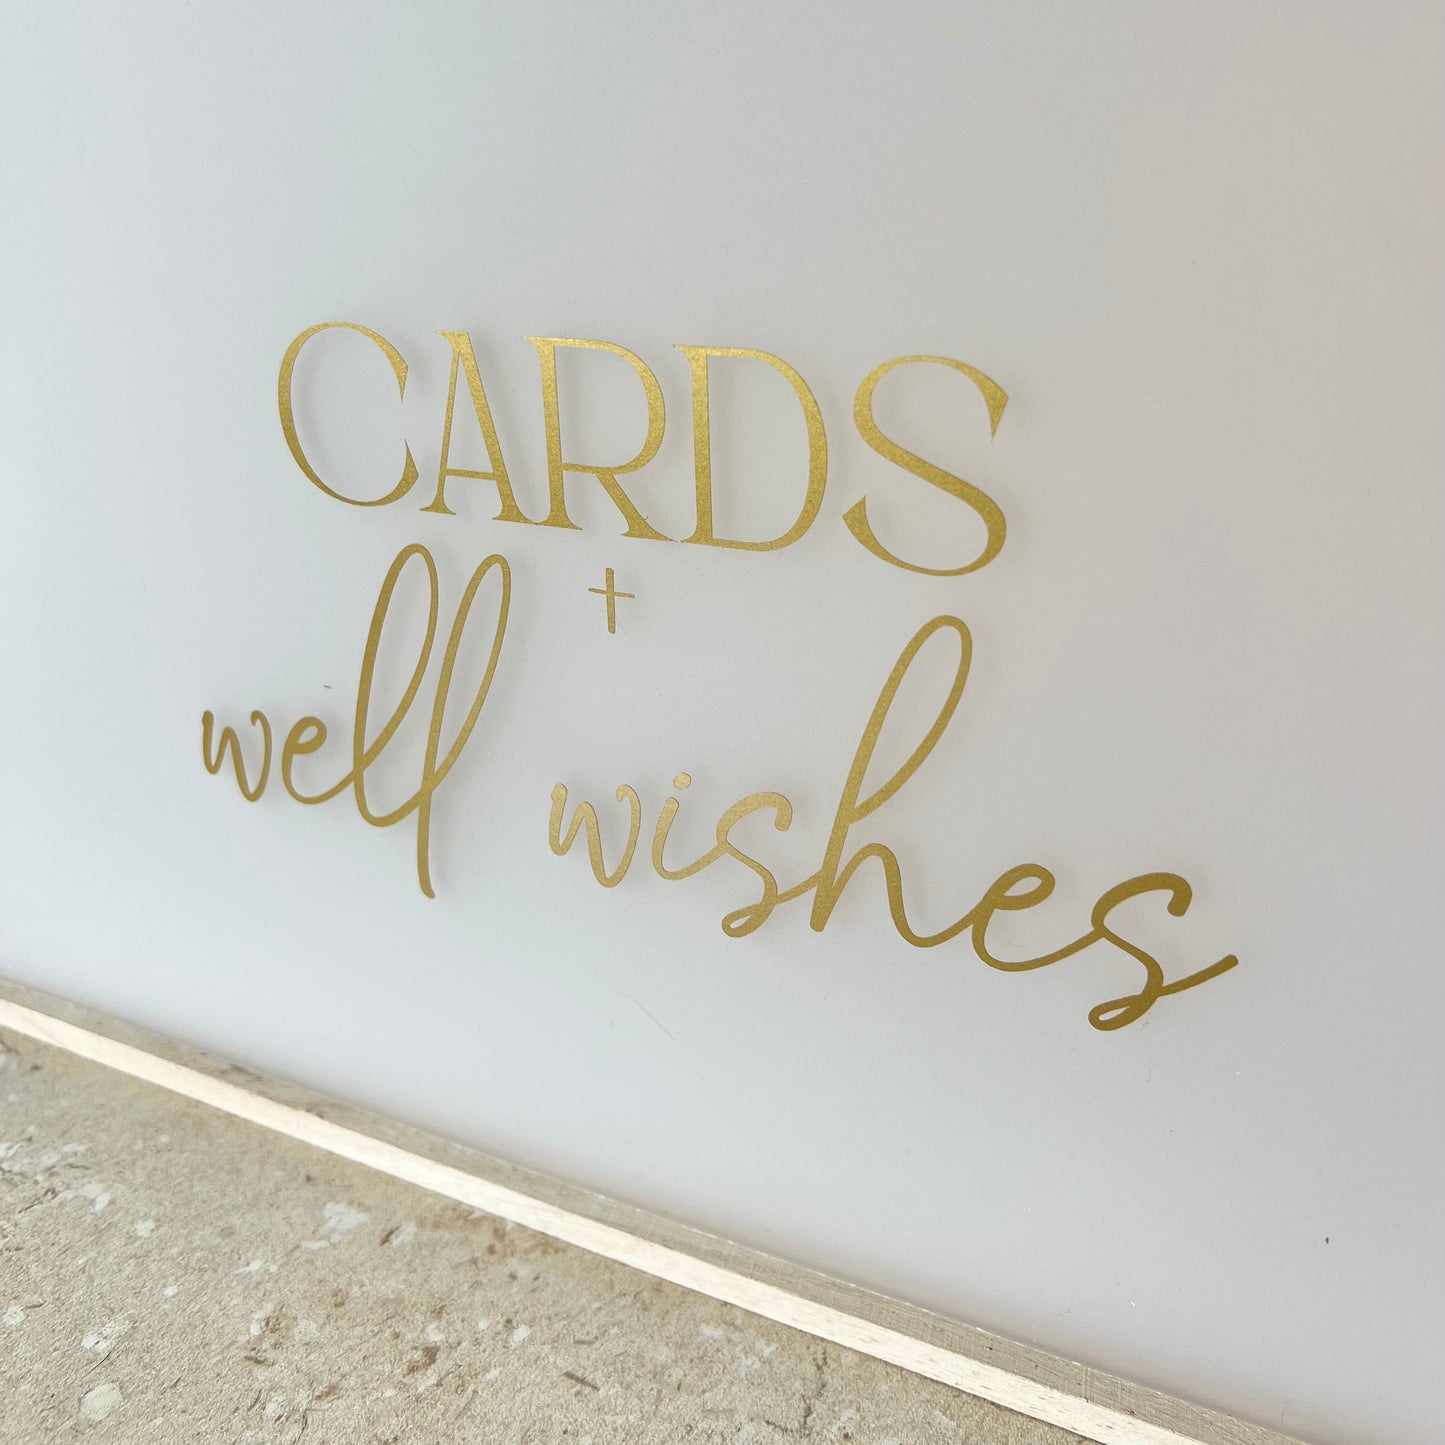 Cards & Well Wishes